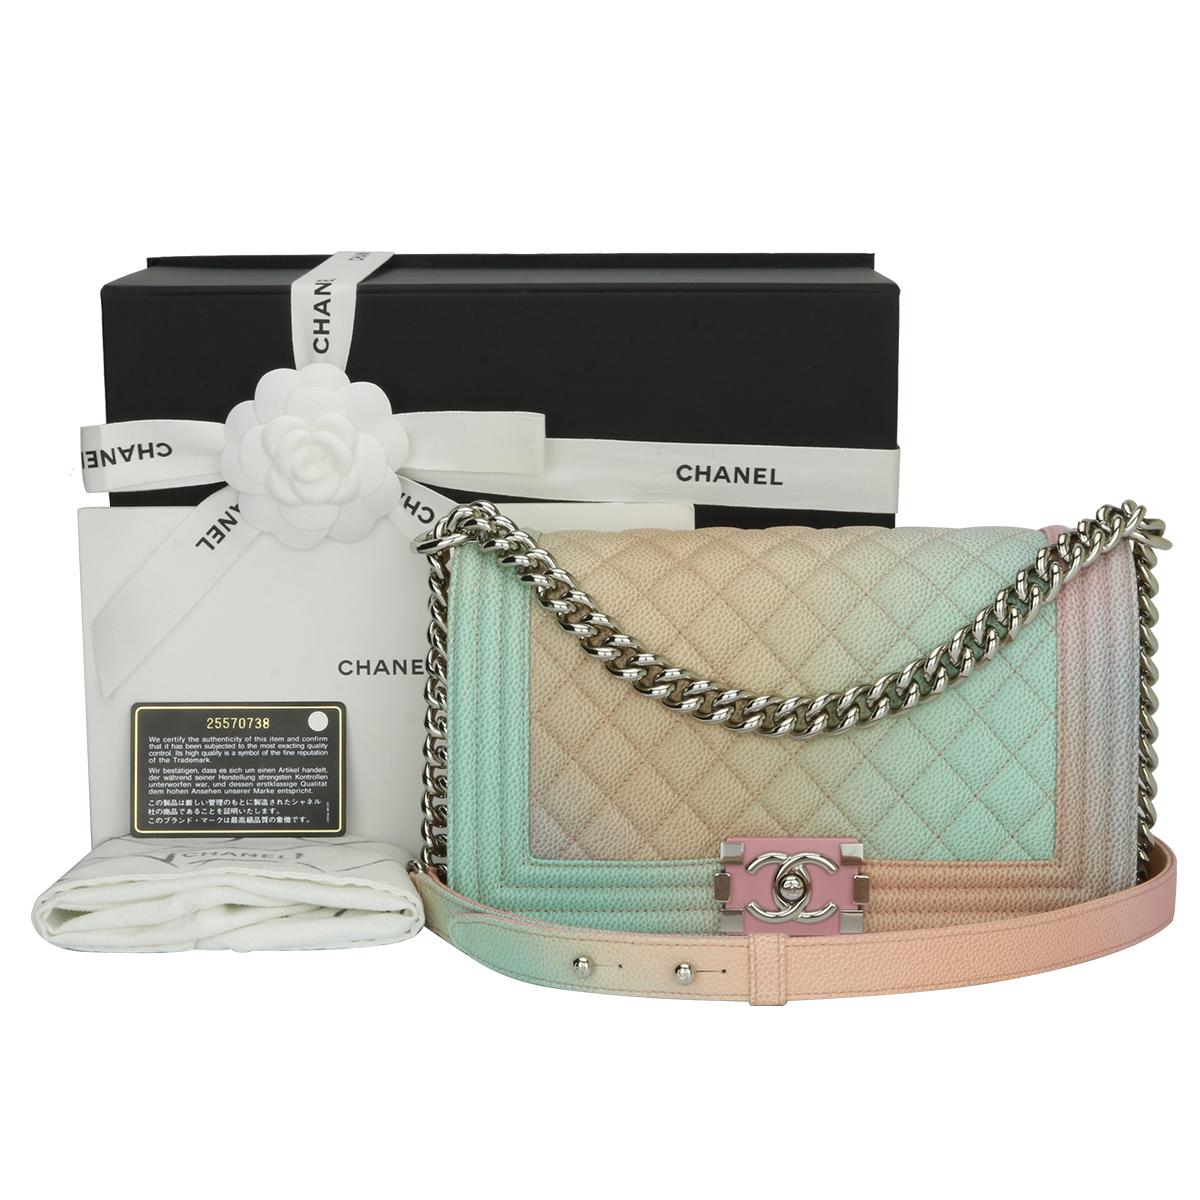 Authentic Chanel Old Medium Boy Bag Rainbow Caviar with Silver Hardware 2018.

This stunning bag is still in a pristine condition, the bag still holds its original shape and the hardware is still very clean and shiny.

Exterior Condition: corners